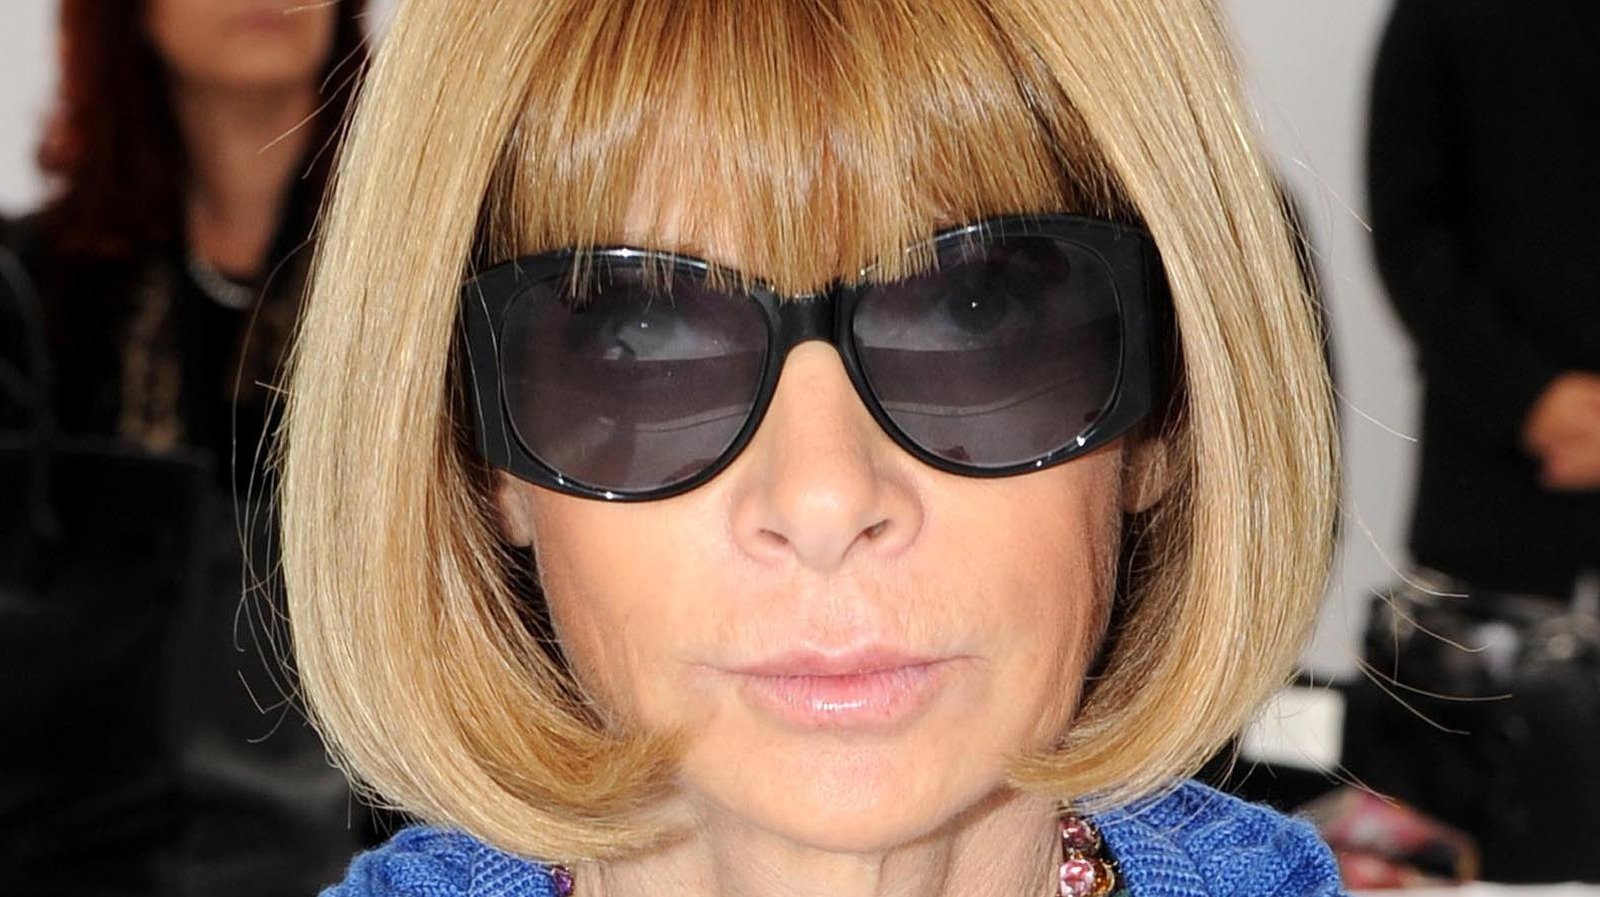 Anna Wintour Removed Her Sunglasses for This - The New York Times